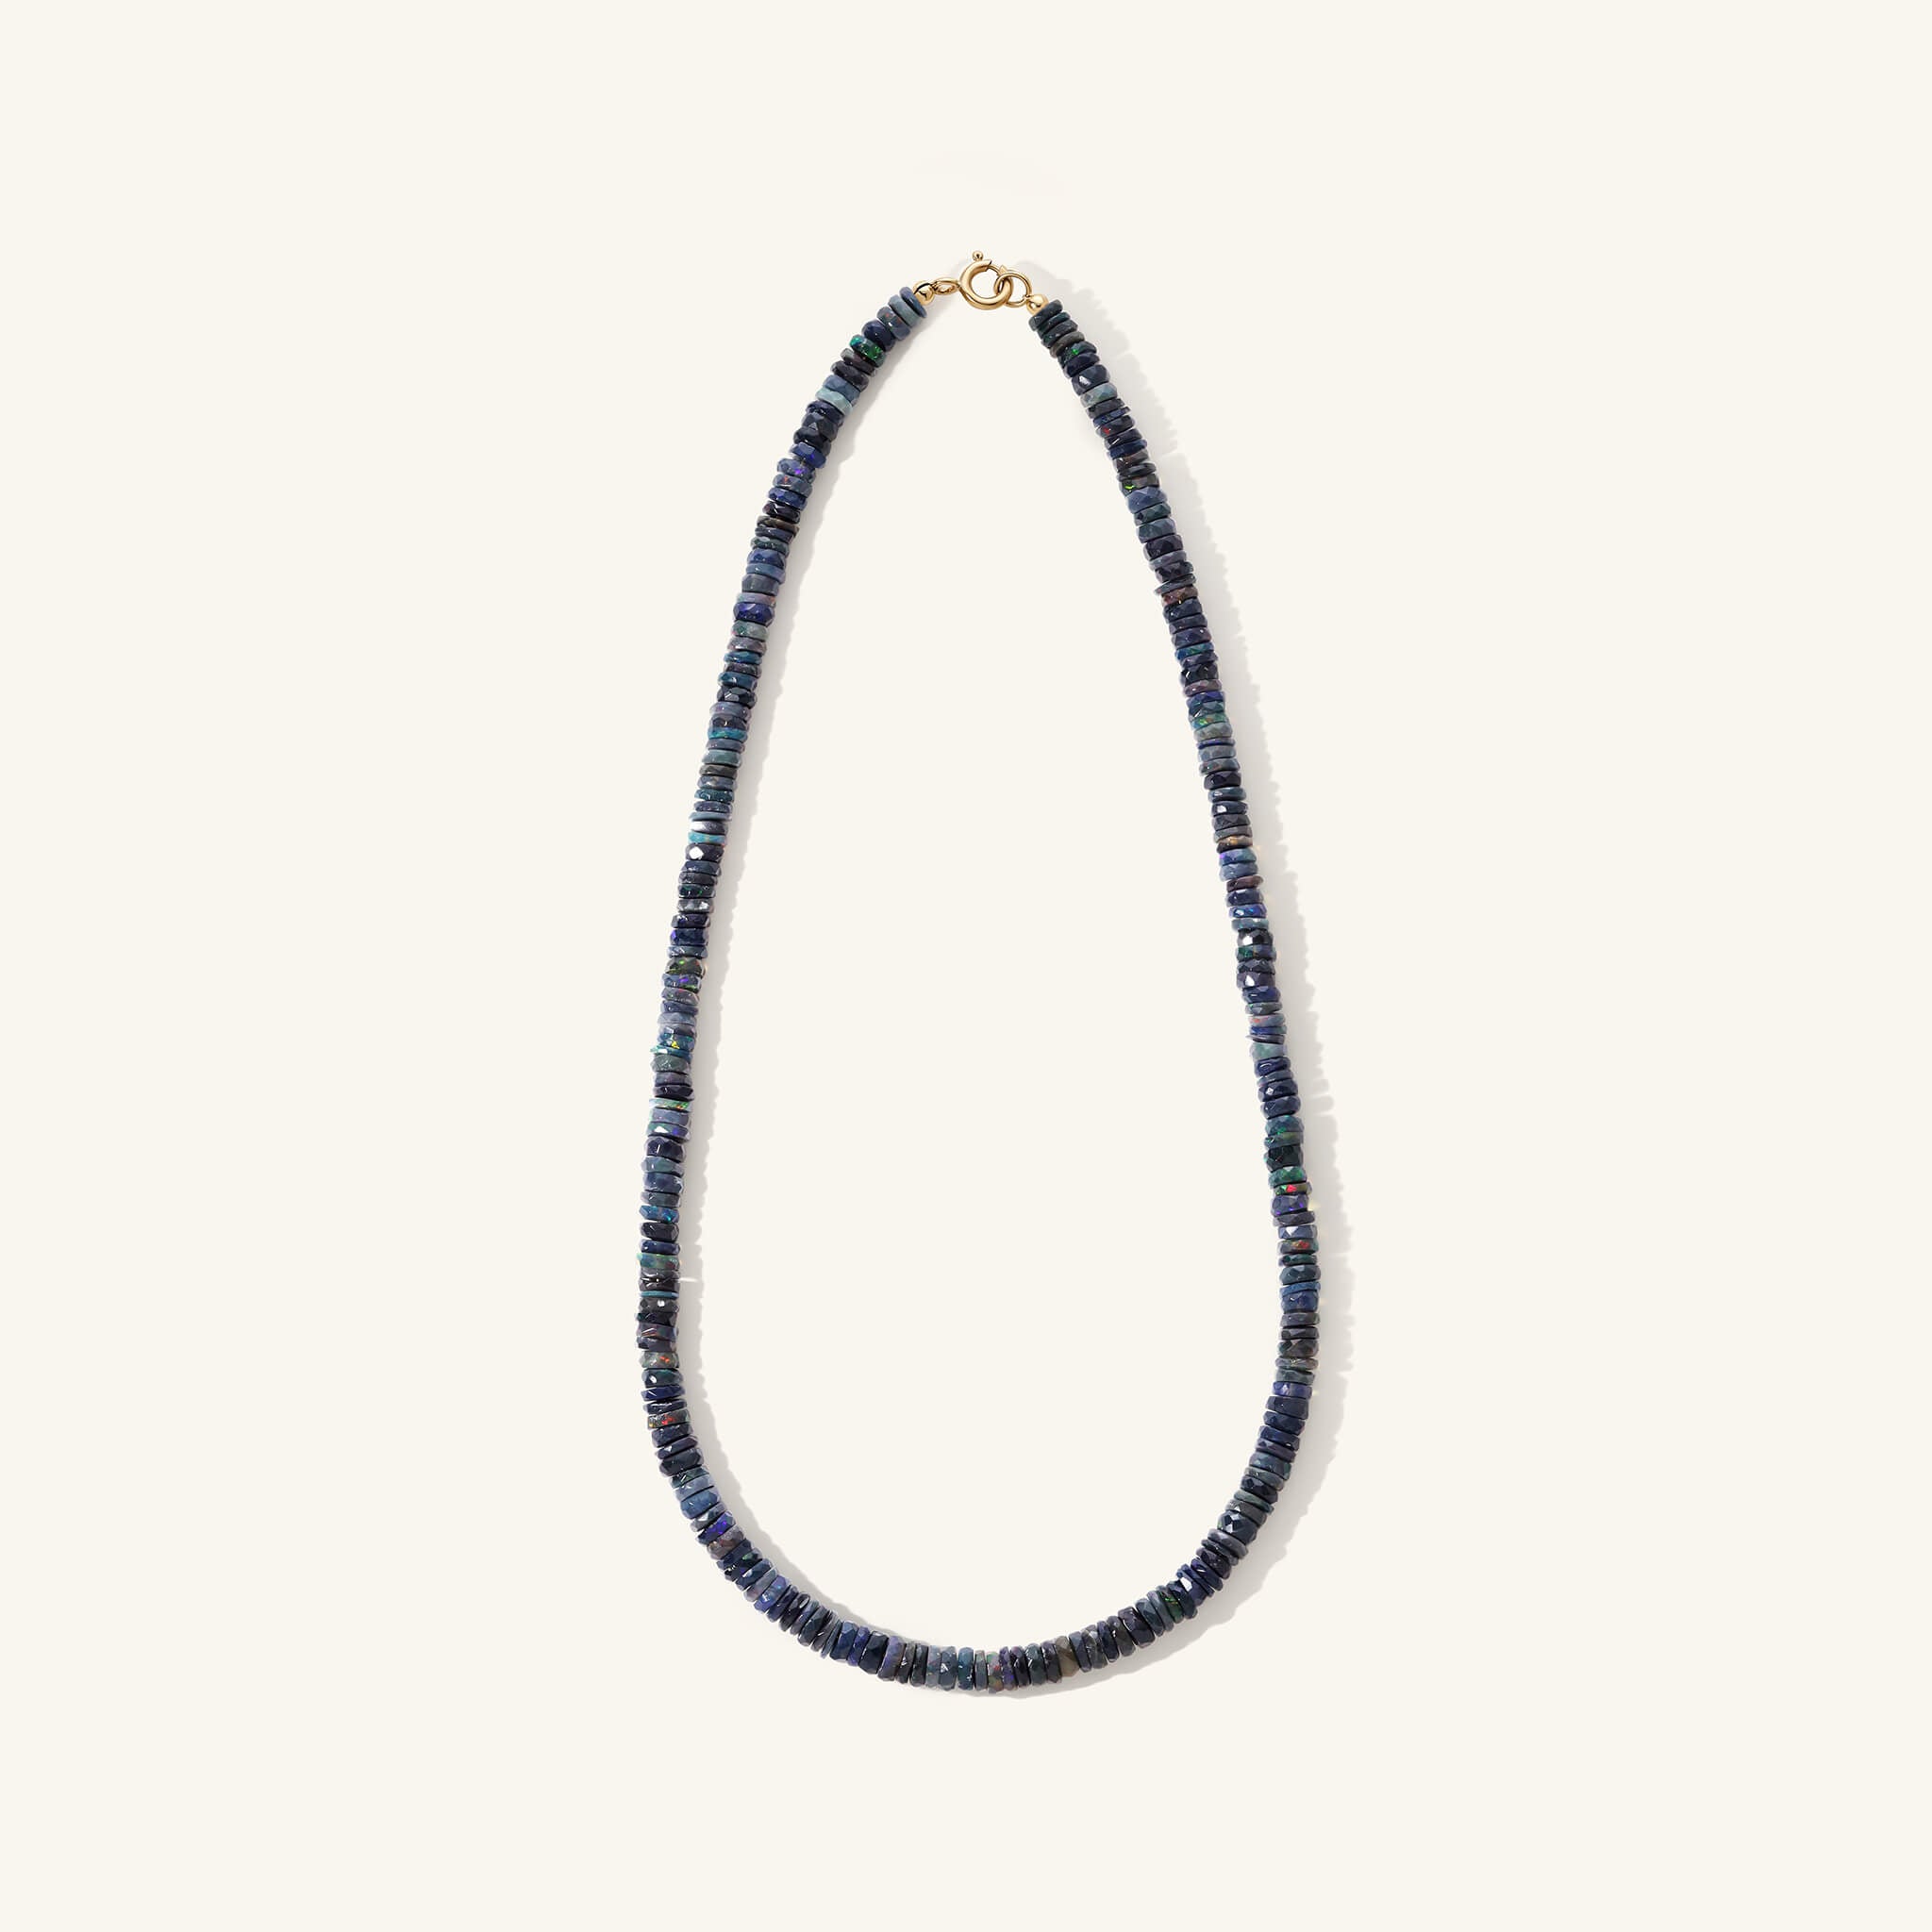 Graduated Midnight Opal Necklace